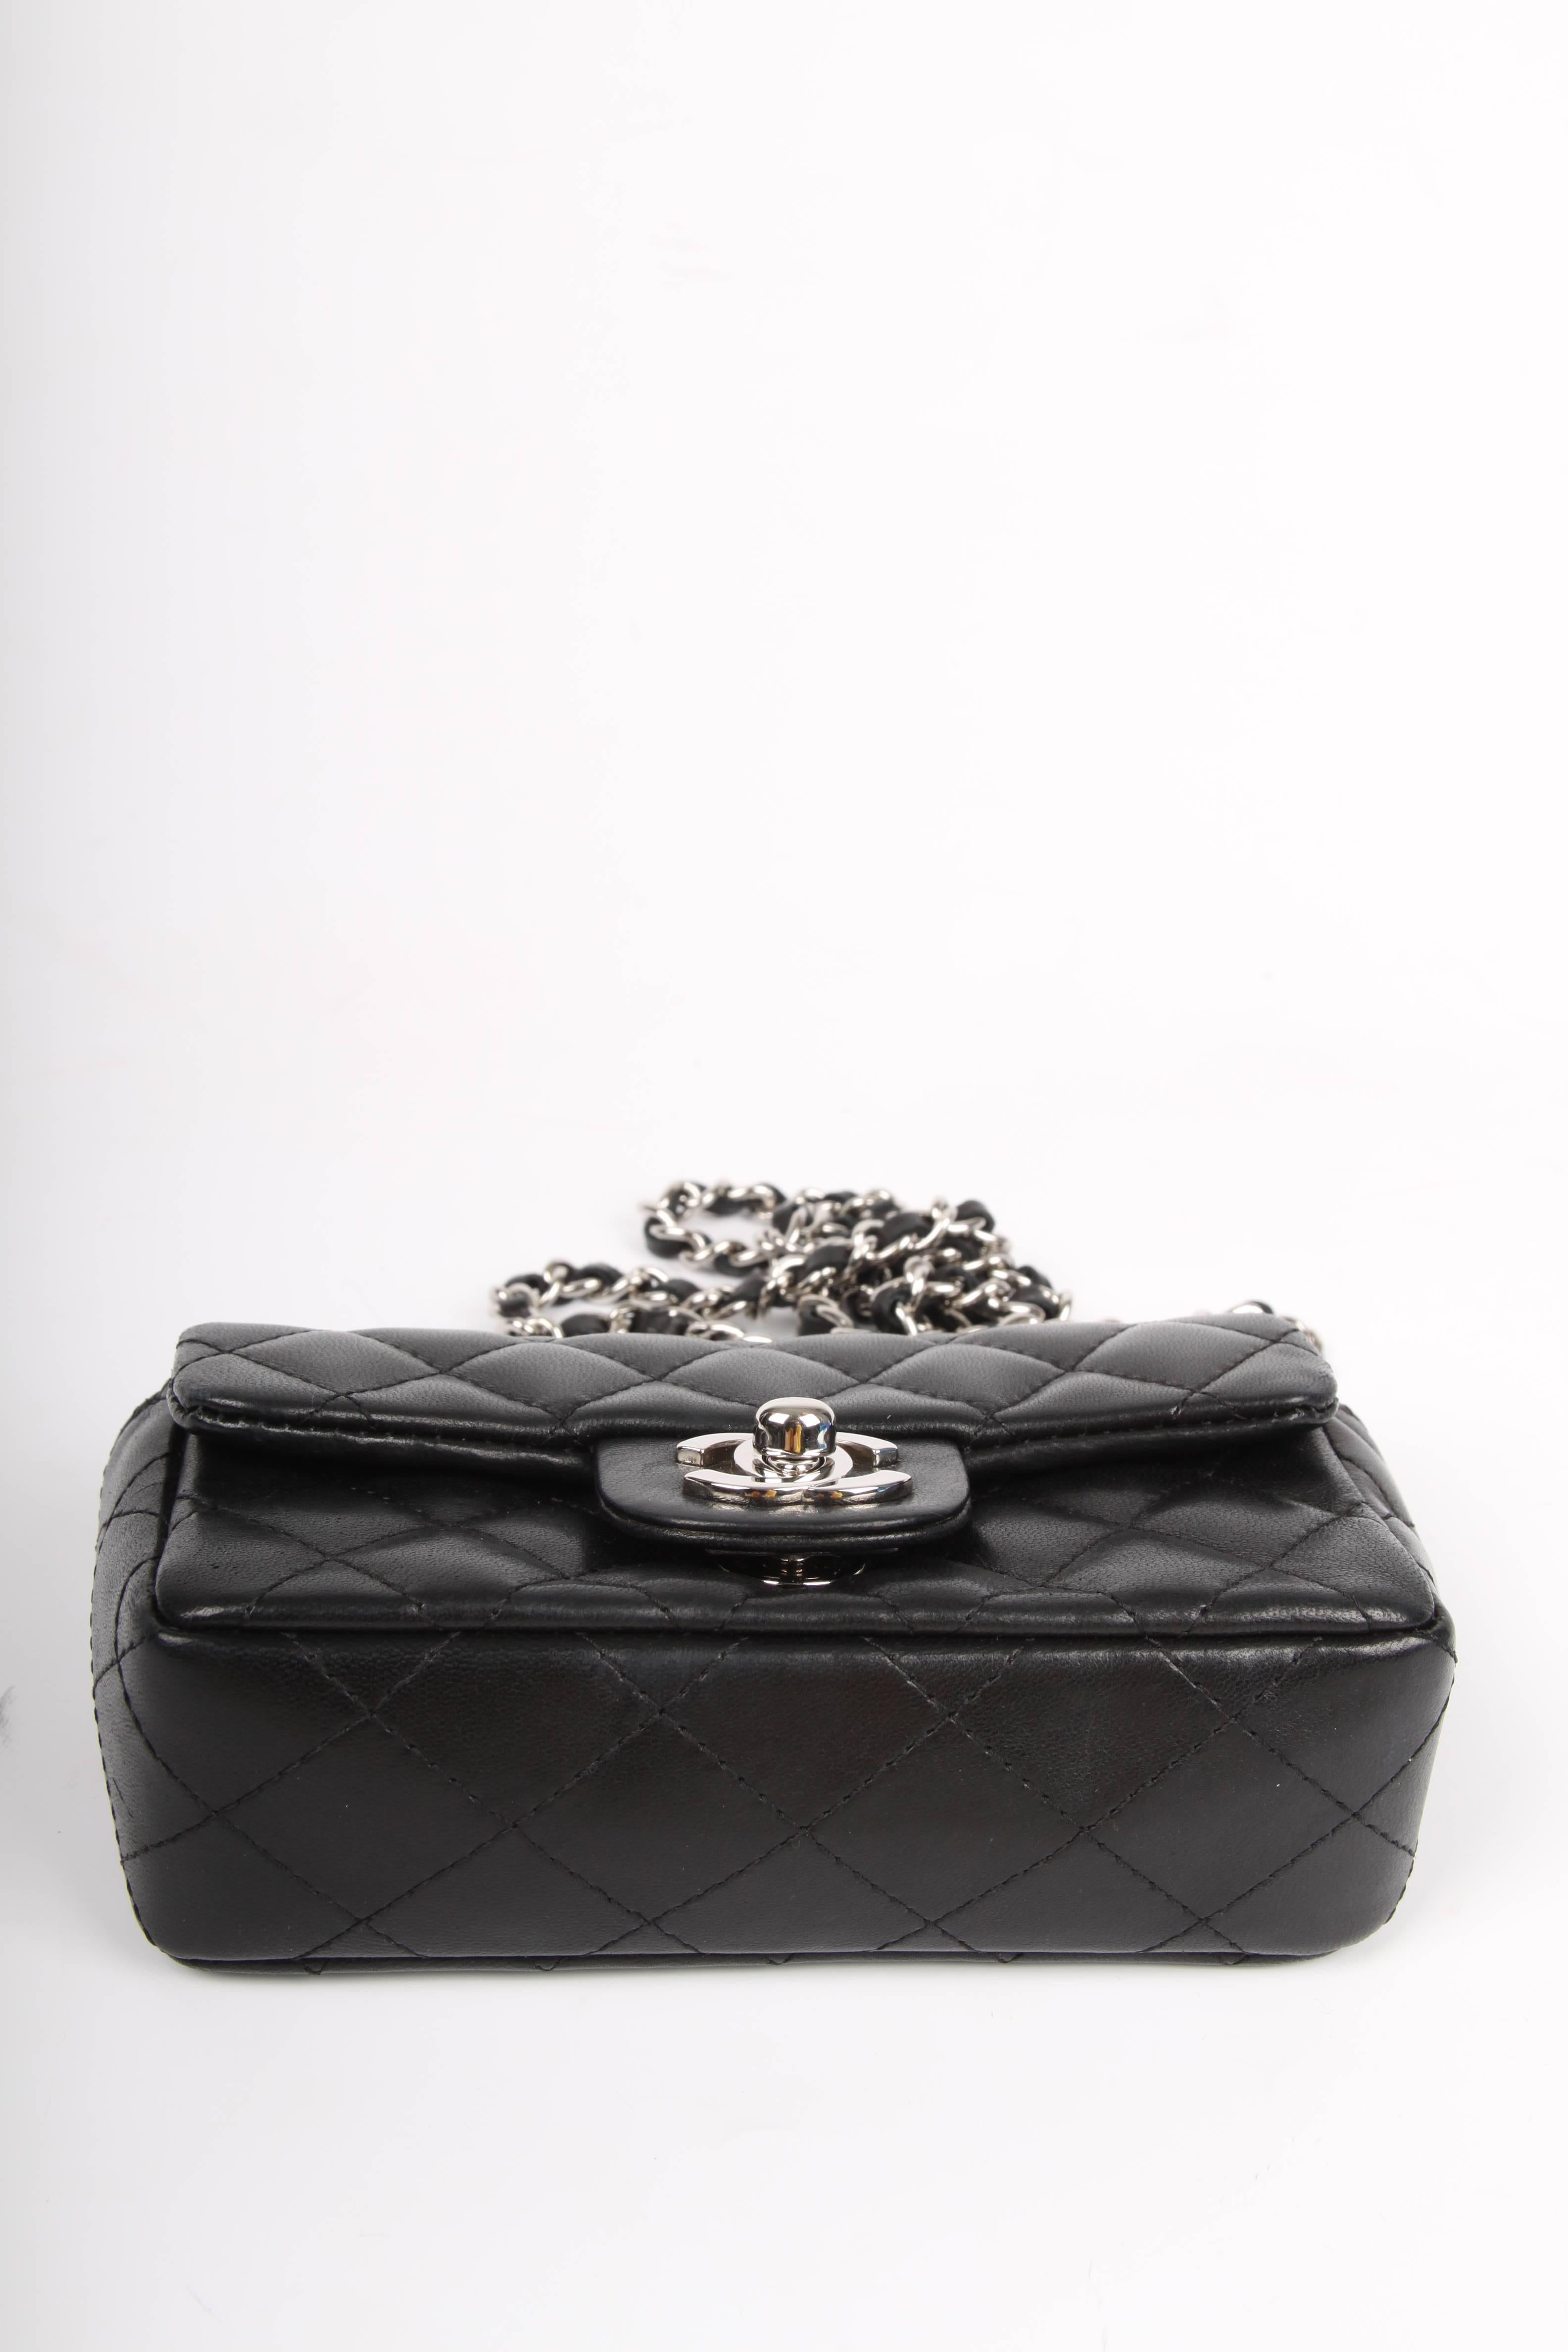 Women's or Men's Chanel Black leather quilted Mini bag, 2005